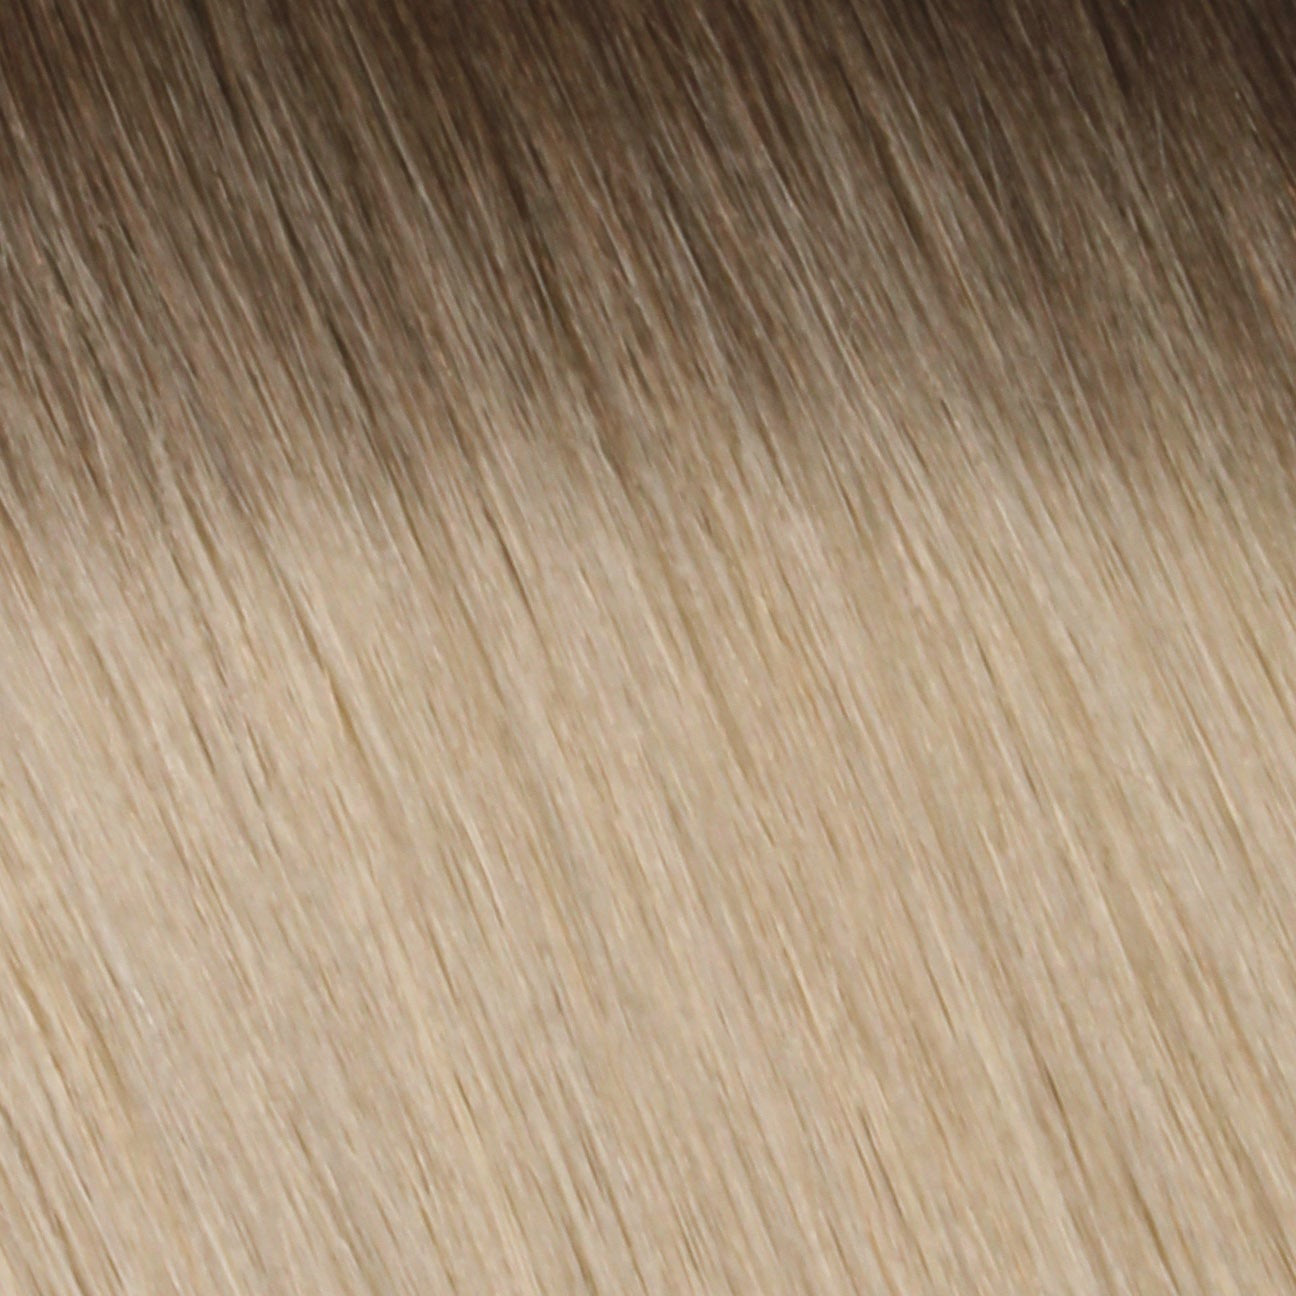 Flat Tip Bonds 22 Inches - SWAY Hair Extensions Rooted-Hollywood-Ash-Blonde-R5-18A-613A SWAY Flat Tip Bonds, 22&quot;- 100% Remy Human Hair Extensions with Italian Keratin. Perfect for hair goals.